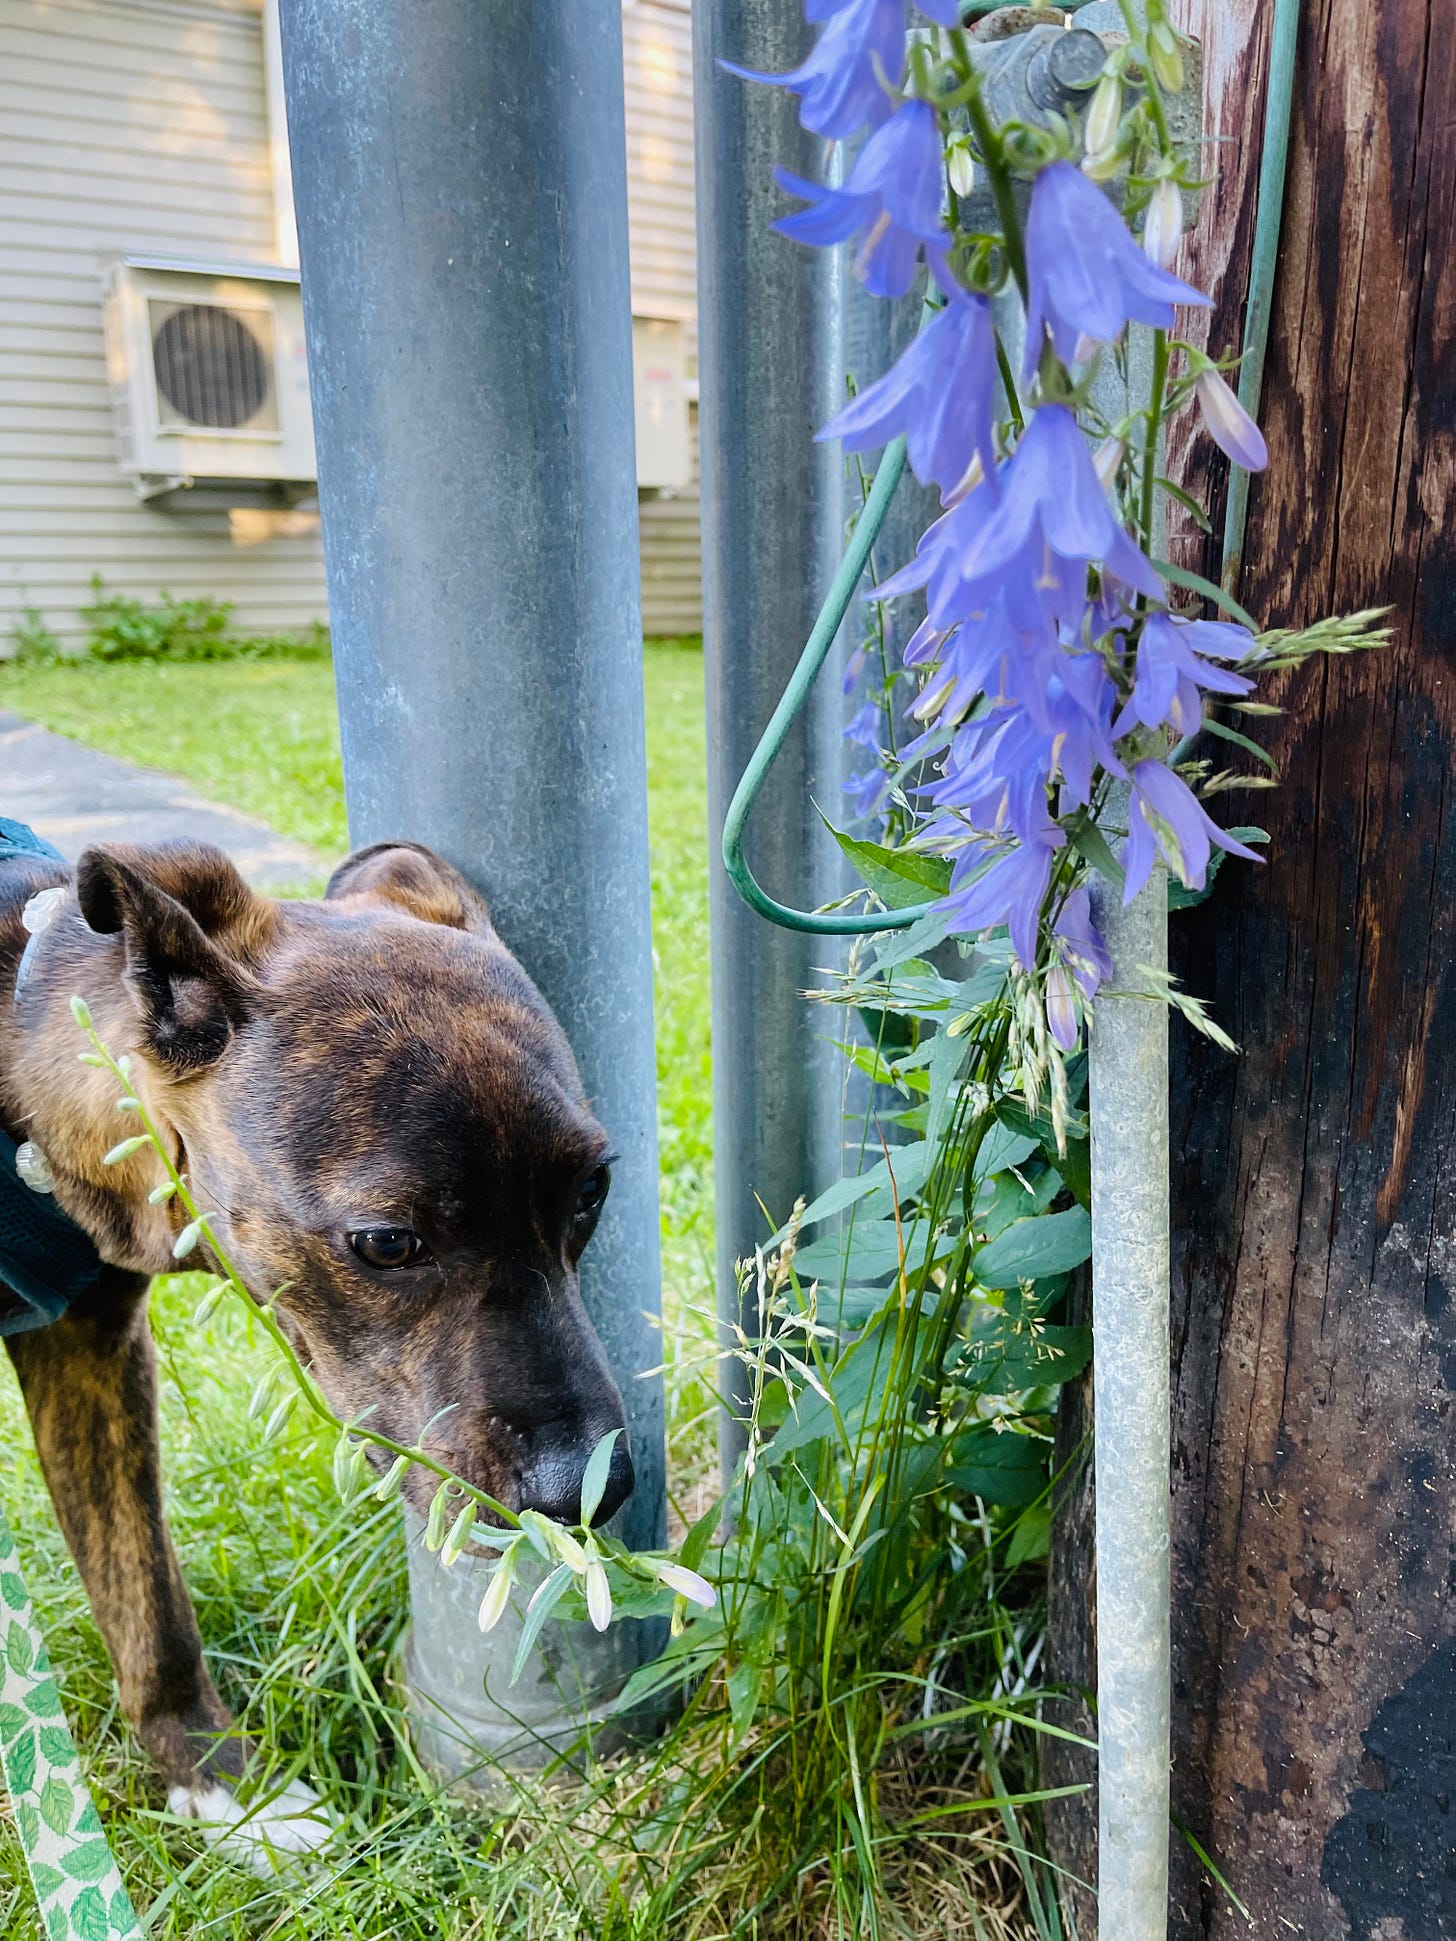 puppy smelling a flower that's growing between a telephone pole and metal tubing